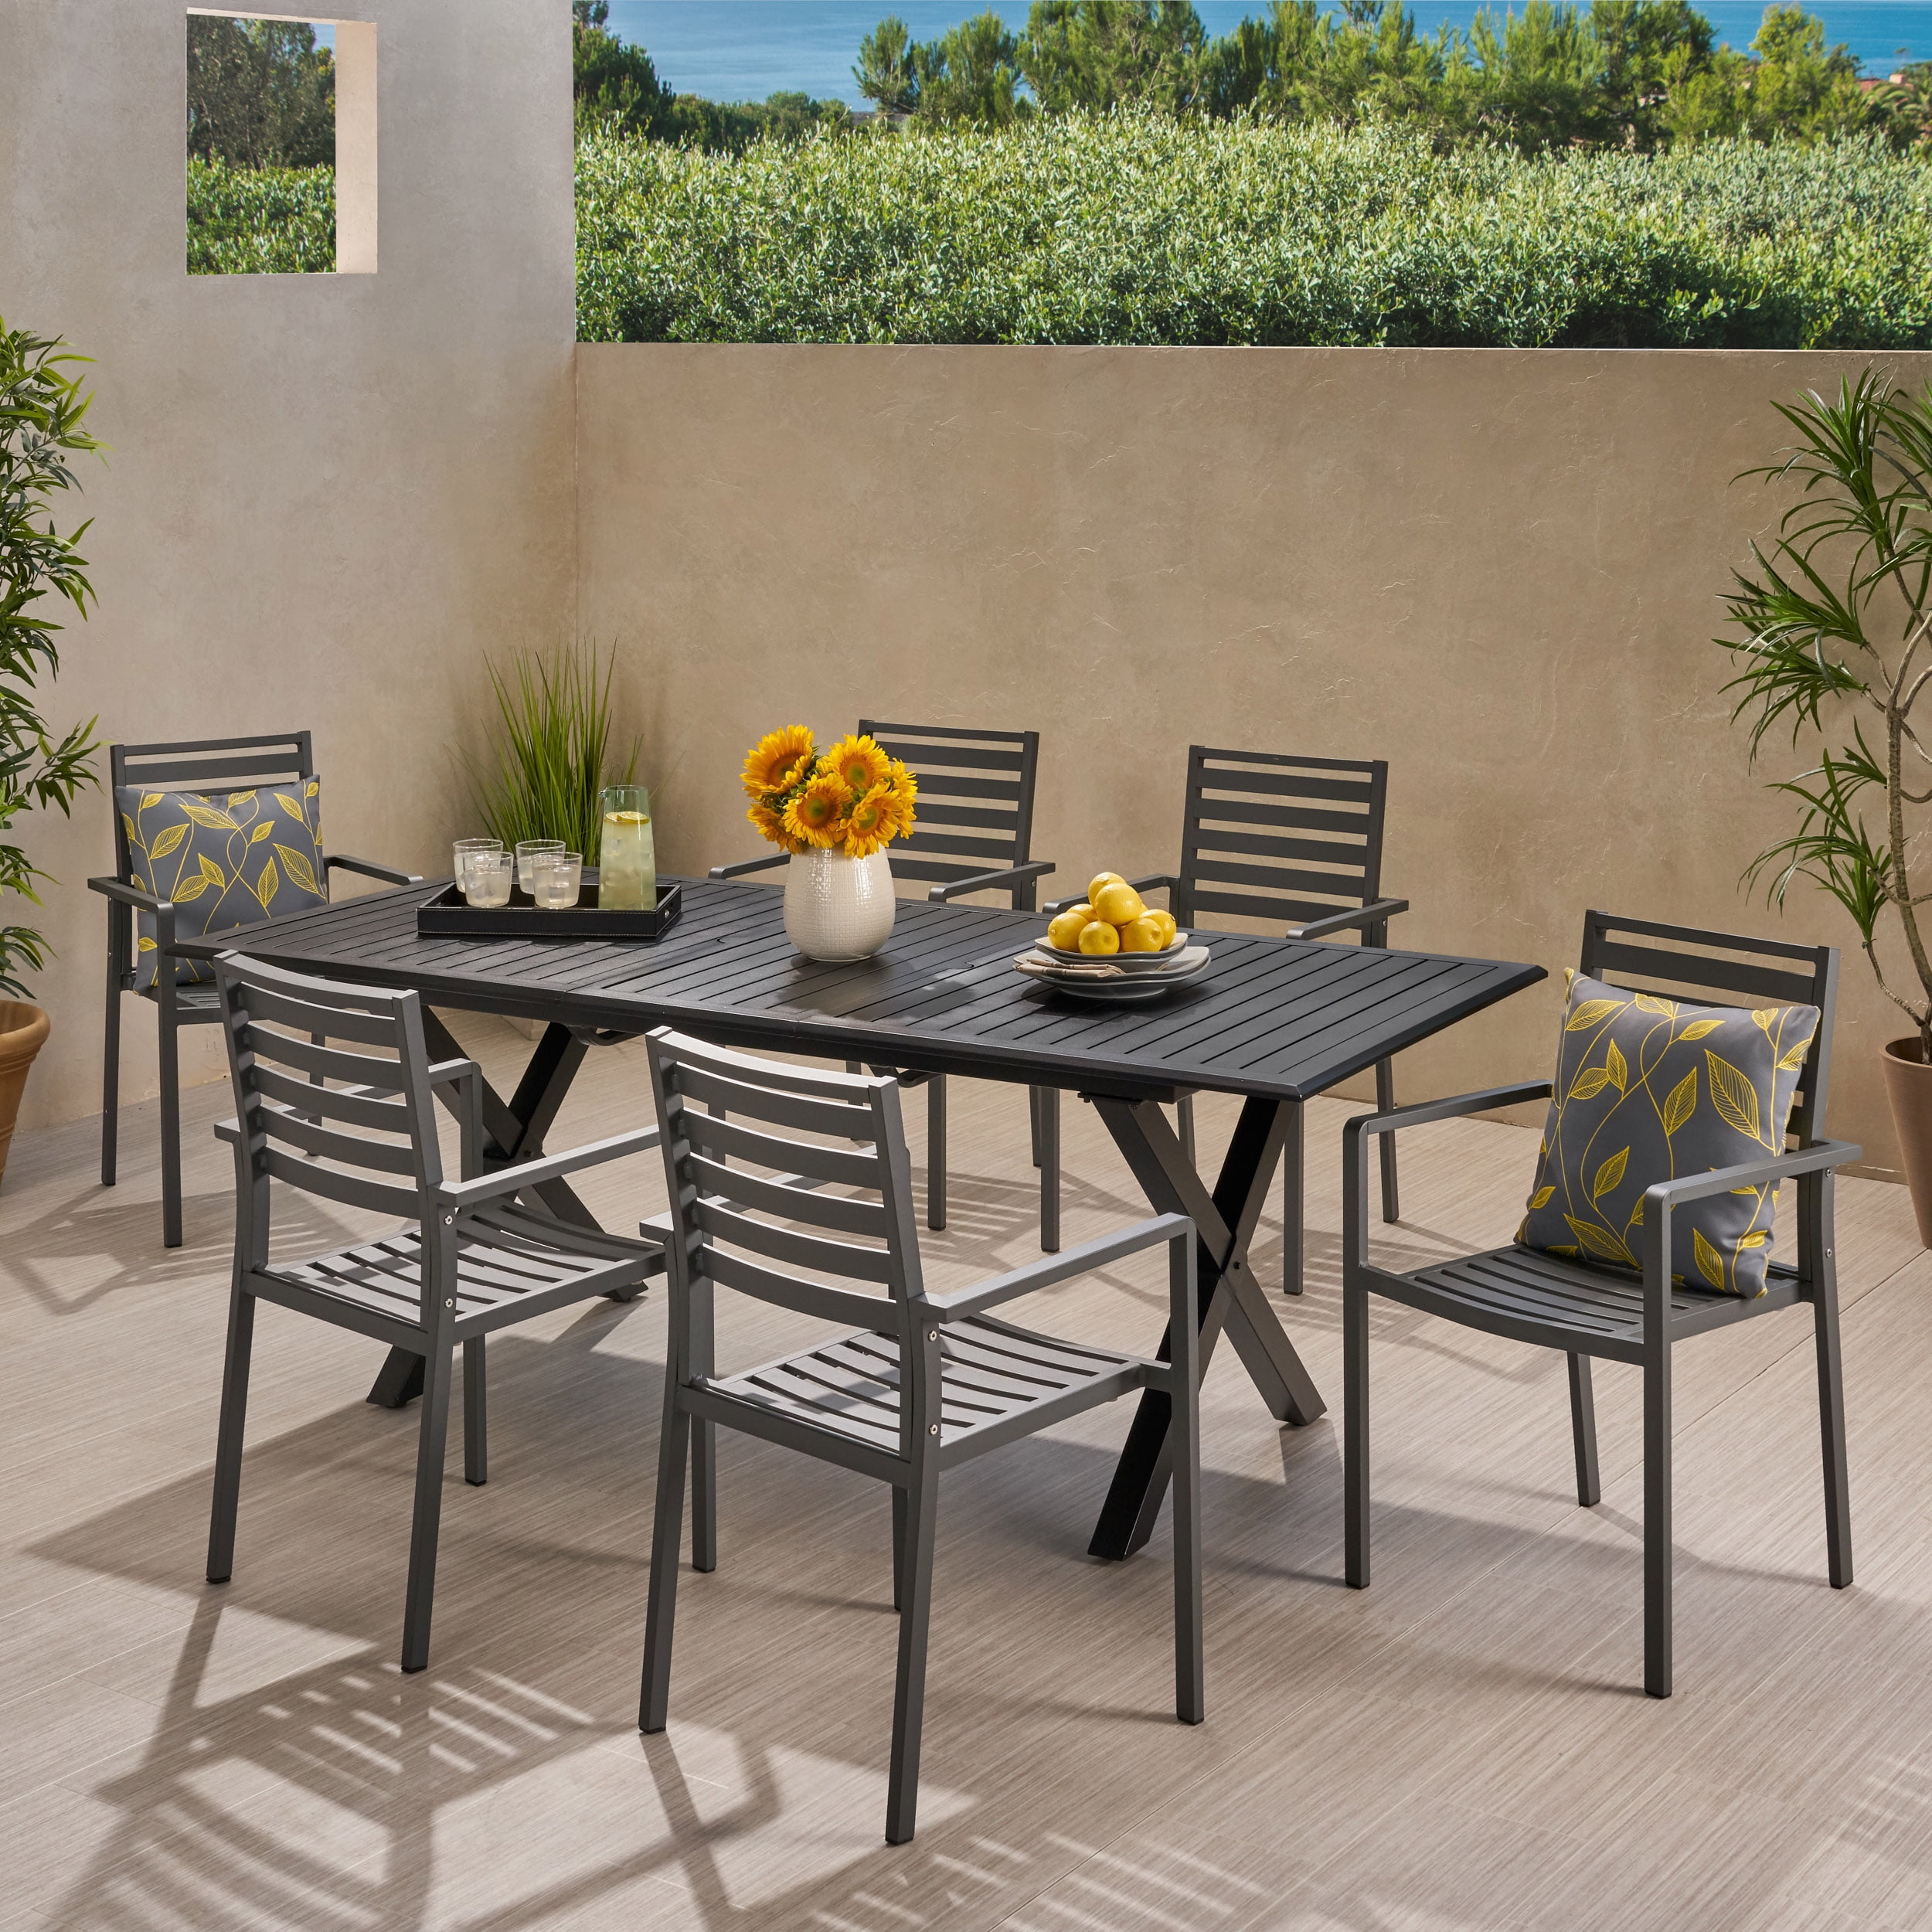 Noxx Outdoor Modern 6 Seater Aluminum Dining Set with Expandable Table